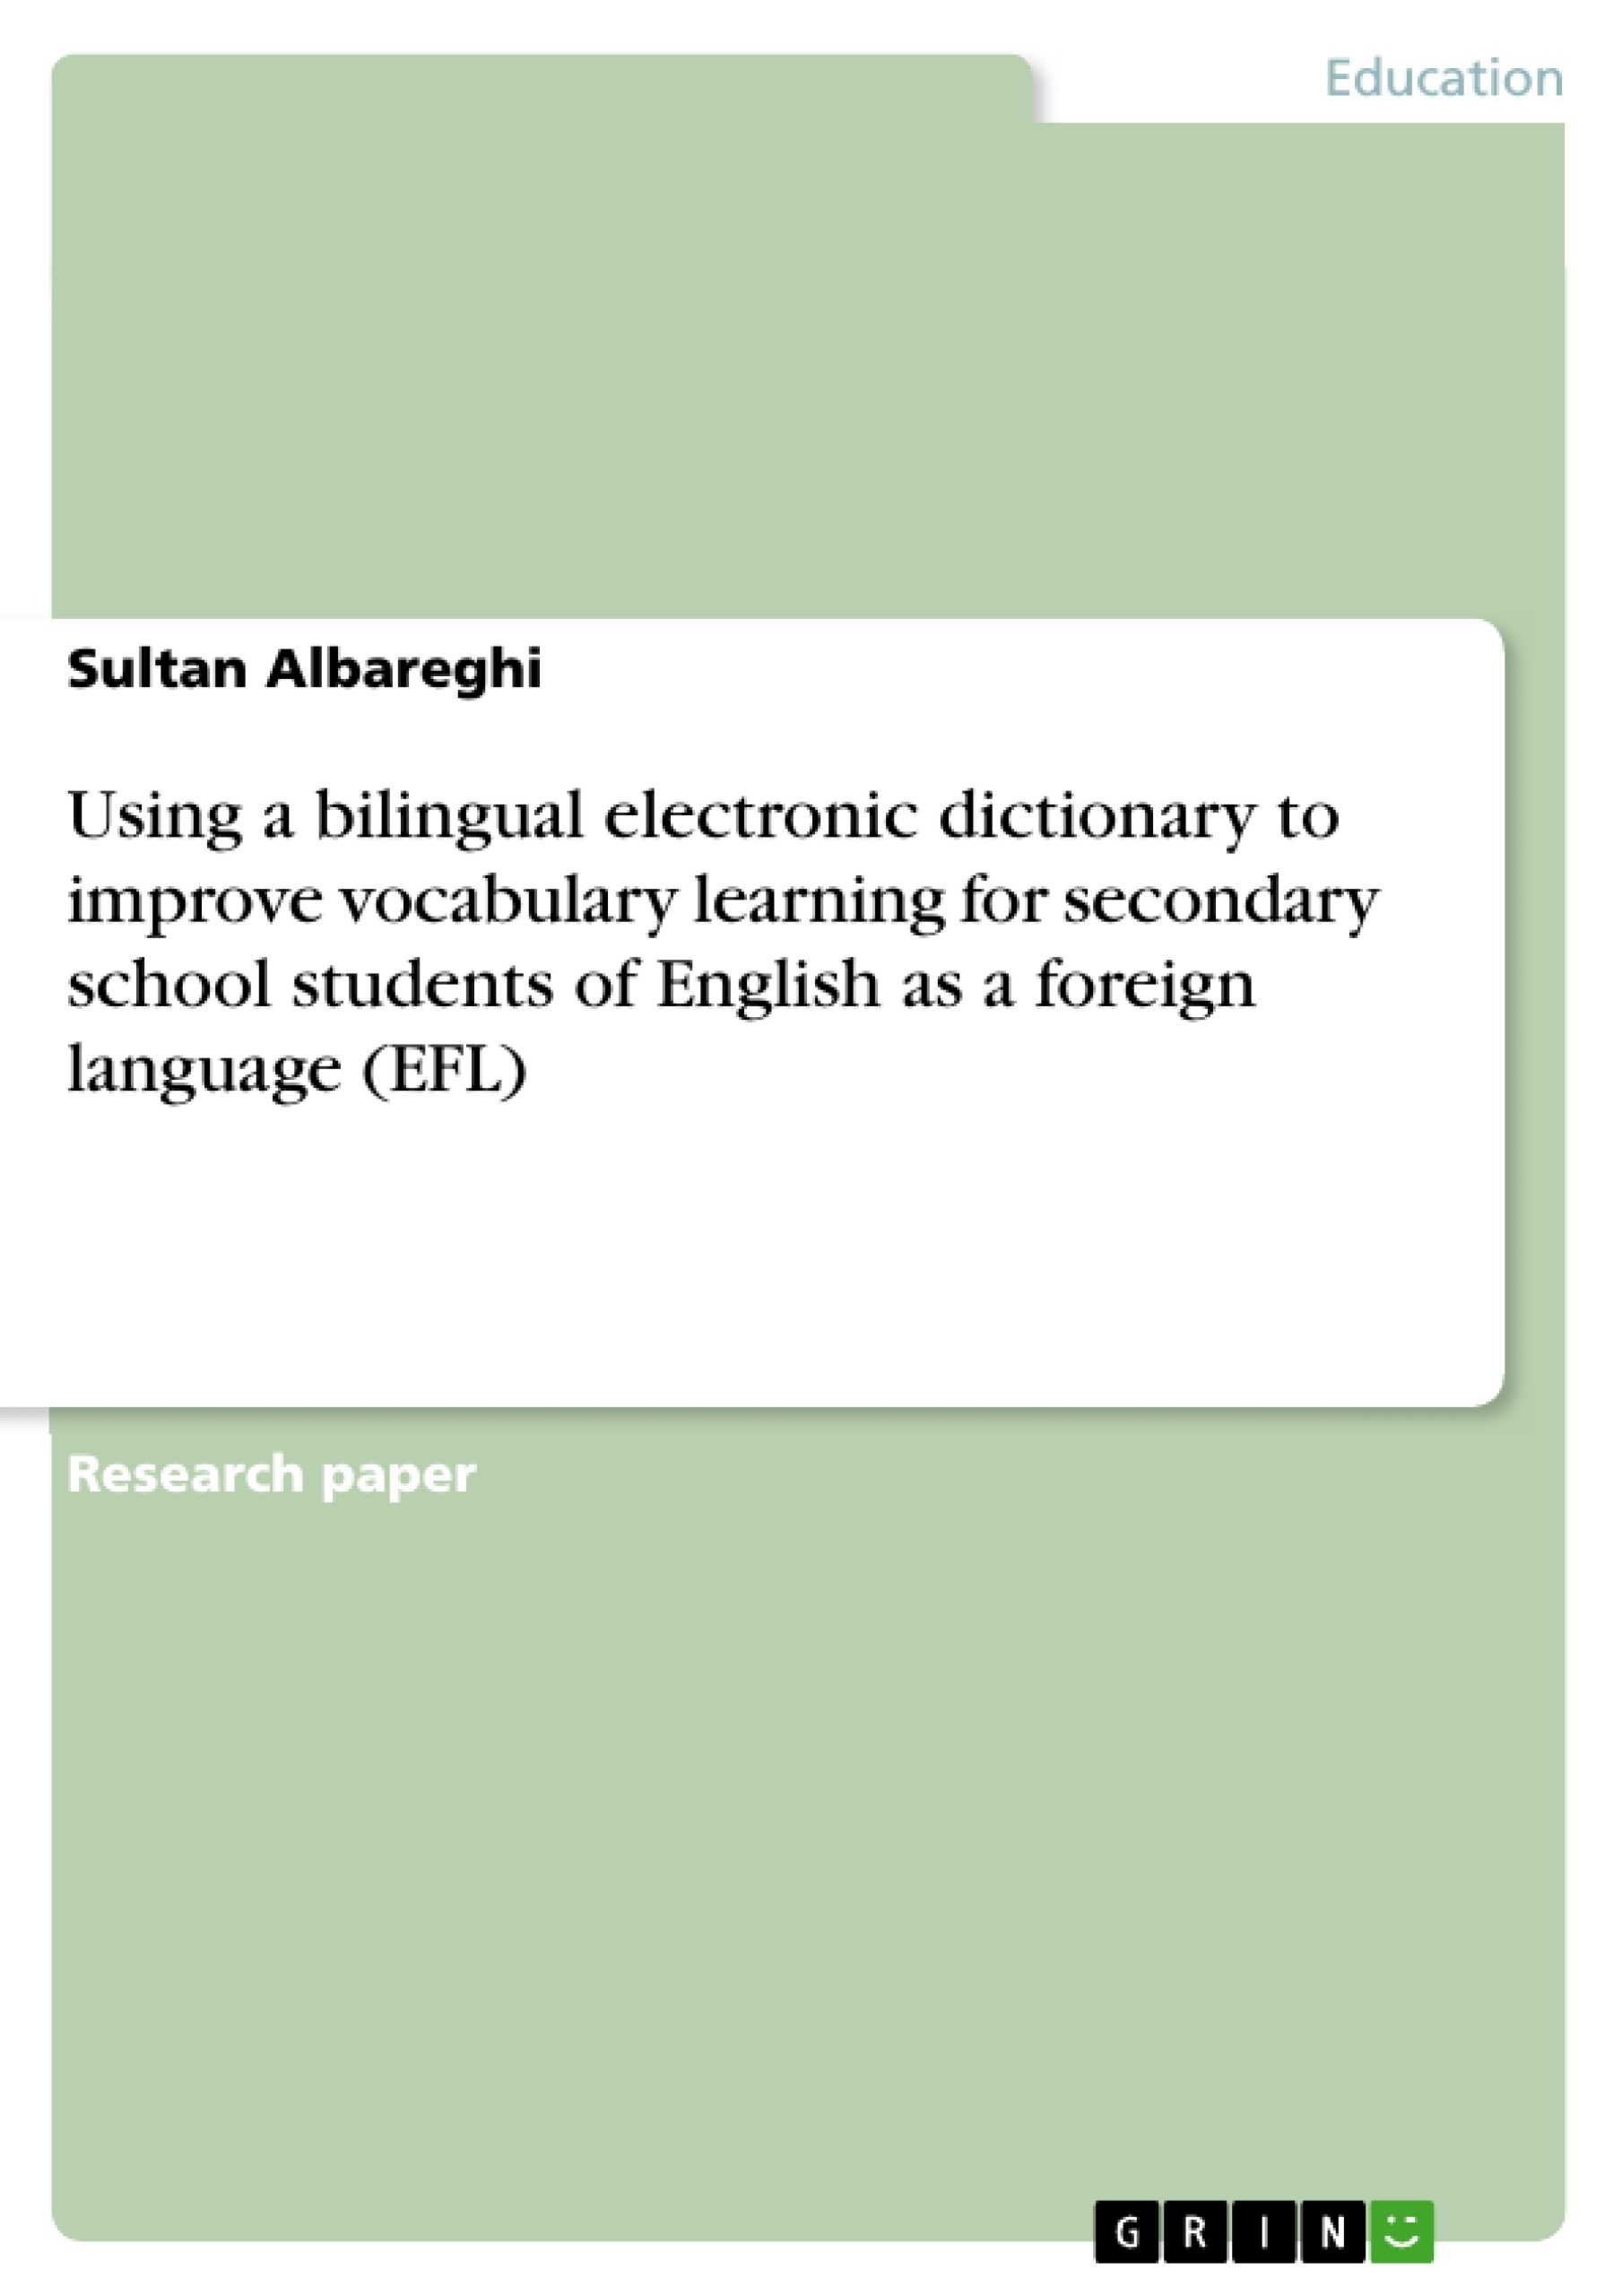 Título: Using a bilingual electronic dictionary to improve vocabulary learning for secondary school students of English as a foreign language (EFL)